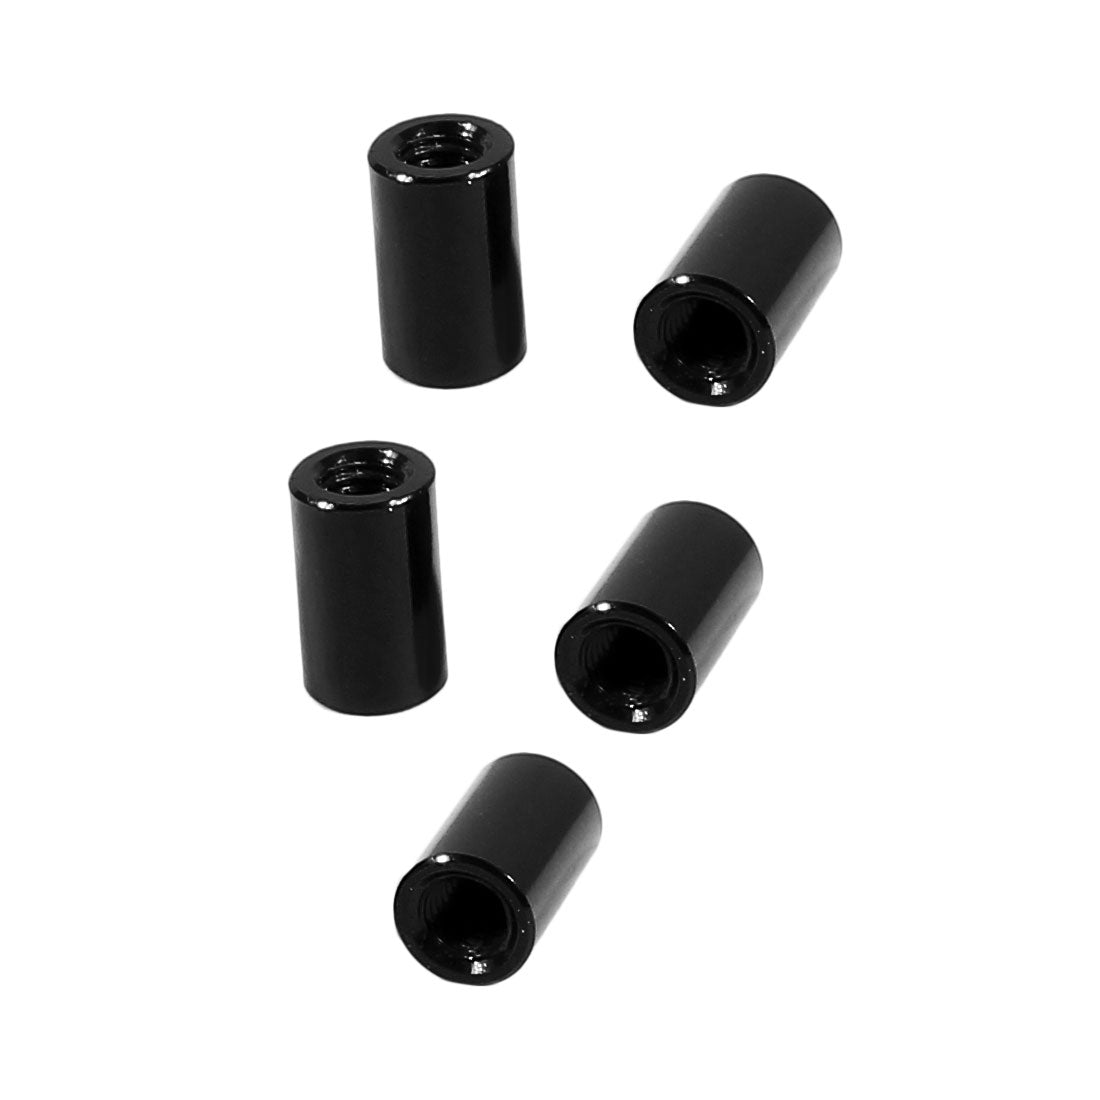 uxcell Uxcell 5Pcs M3 x 8mm Round Aluminum Column Alloy Standoff Spacer Stud Fastener for Quadcopter Black